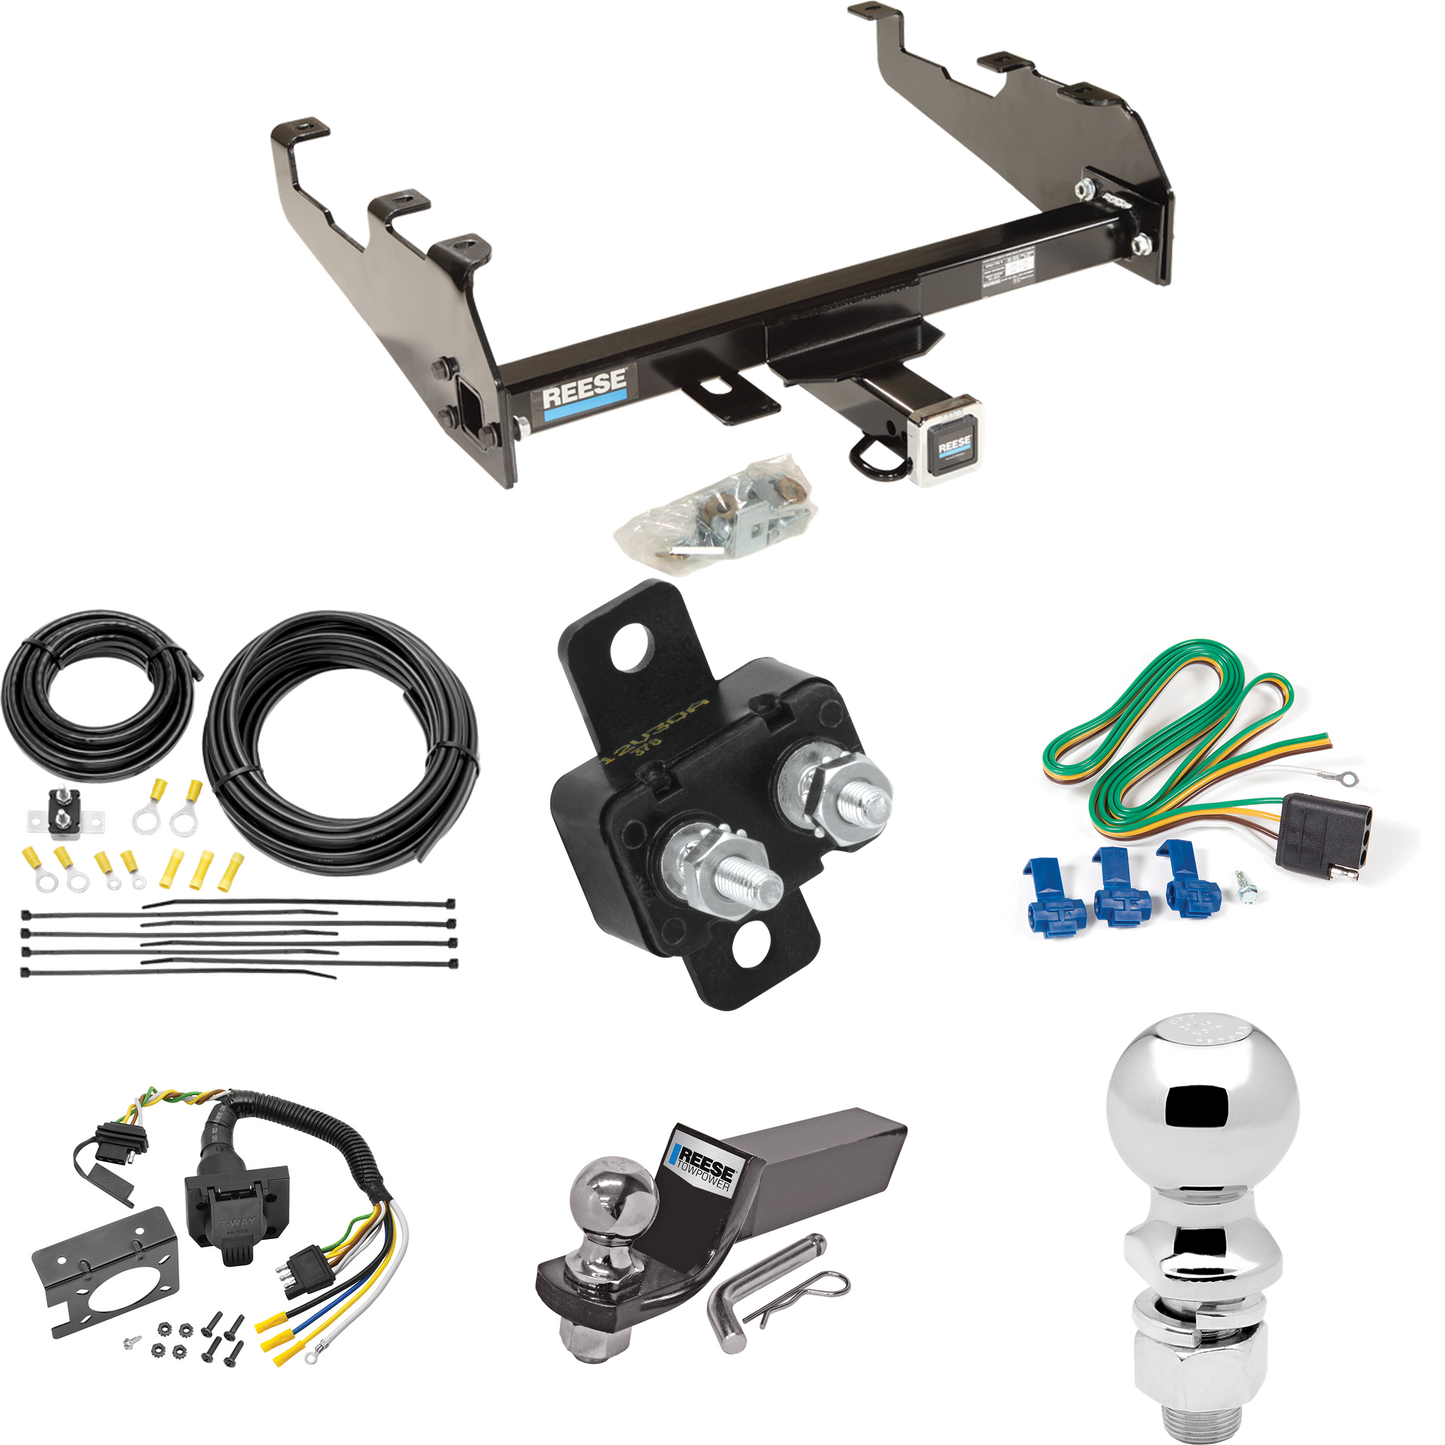 Fits 1963-1965 GMC 1000 Series Trailer Hitch Tow PKG w/ 7-Way RV Wiring + 2" & 2-5/16" Ball + Drop Mount (For w/Deep Drop Bumper Models) By Reese Towpower